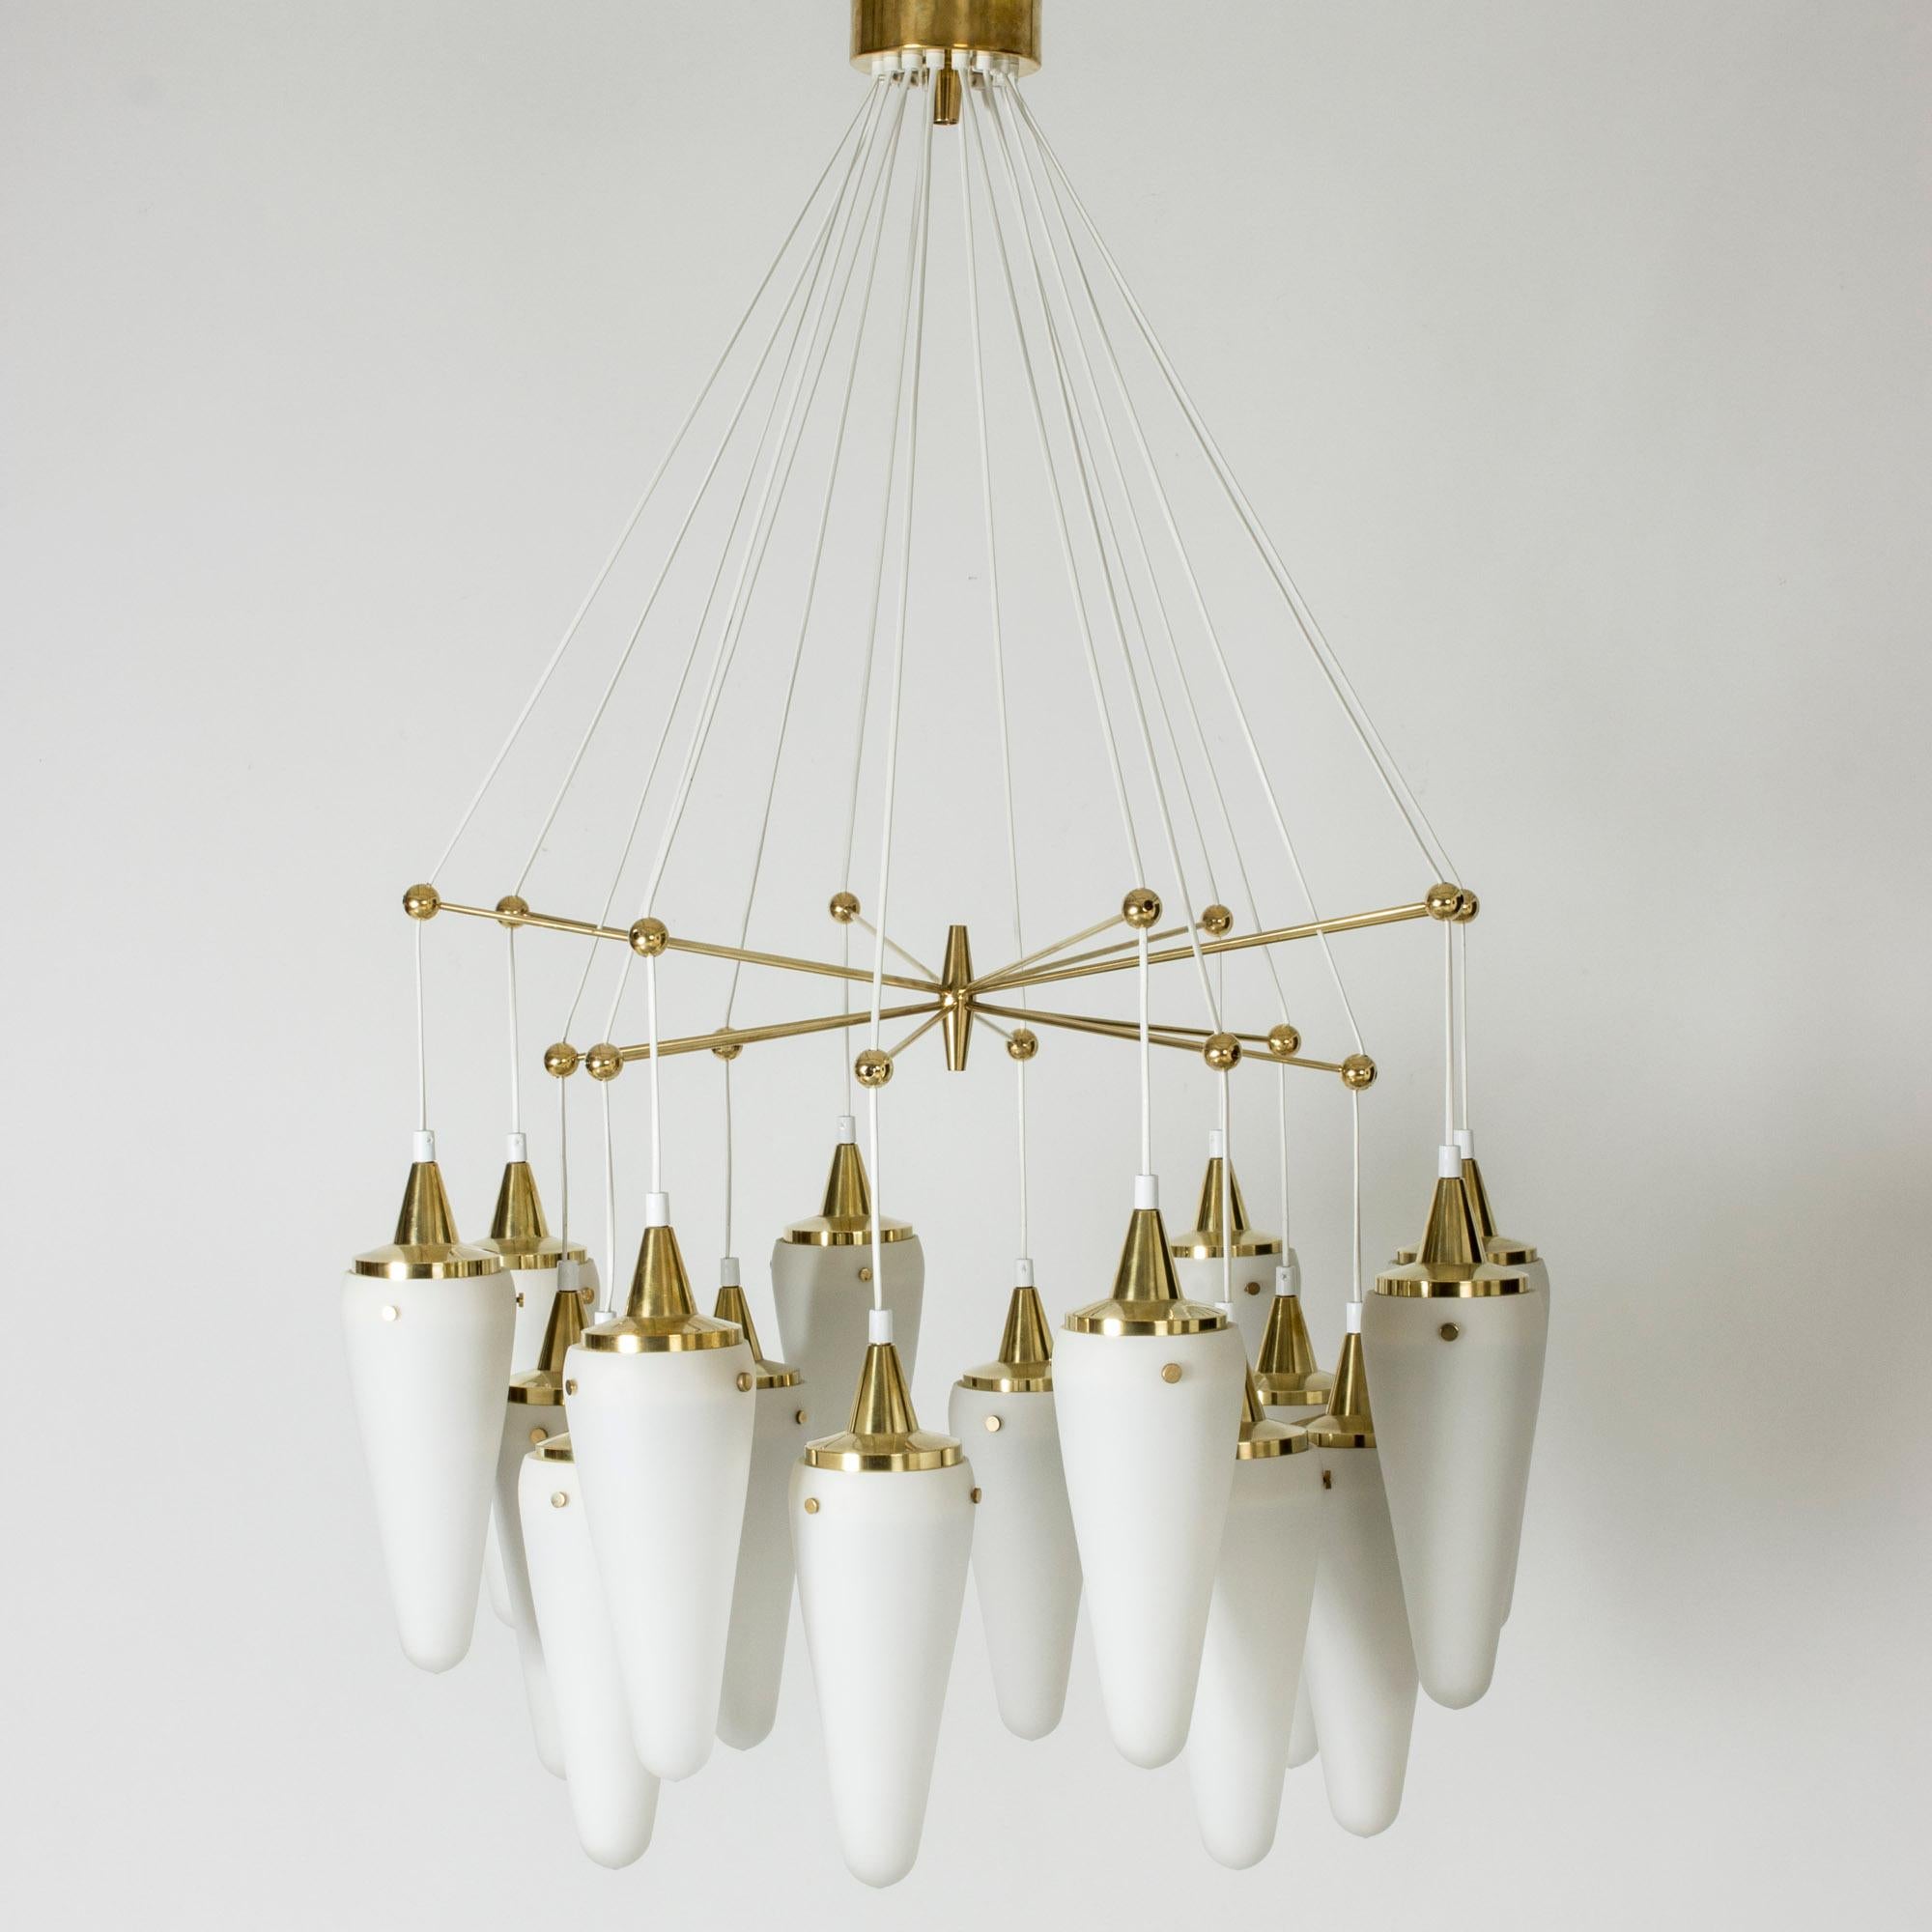 Stunning chandelier by Hans-Agne Jakobsson, in a rare, luxurious design. Beautiful brass frame with arms coming out from the center, with balls at the ends, suspending sixteen opaline shades.